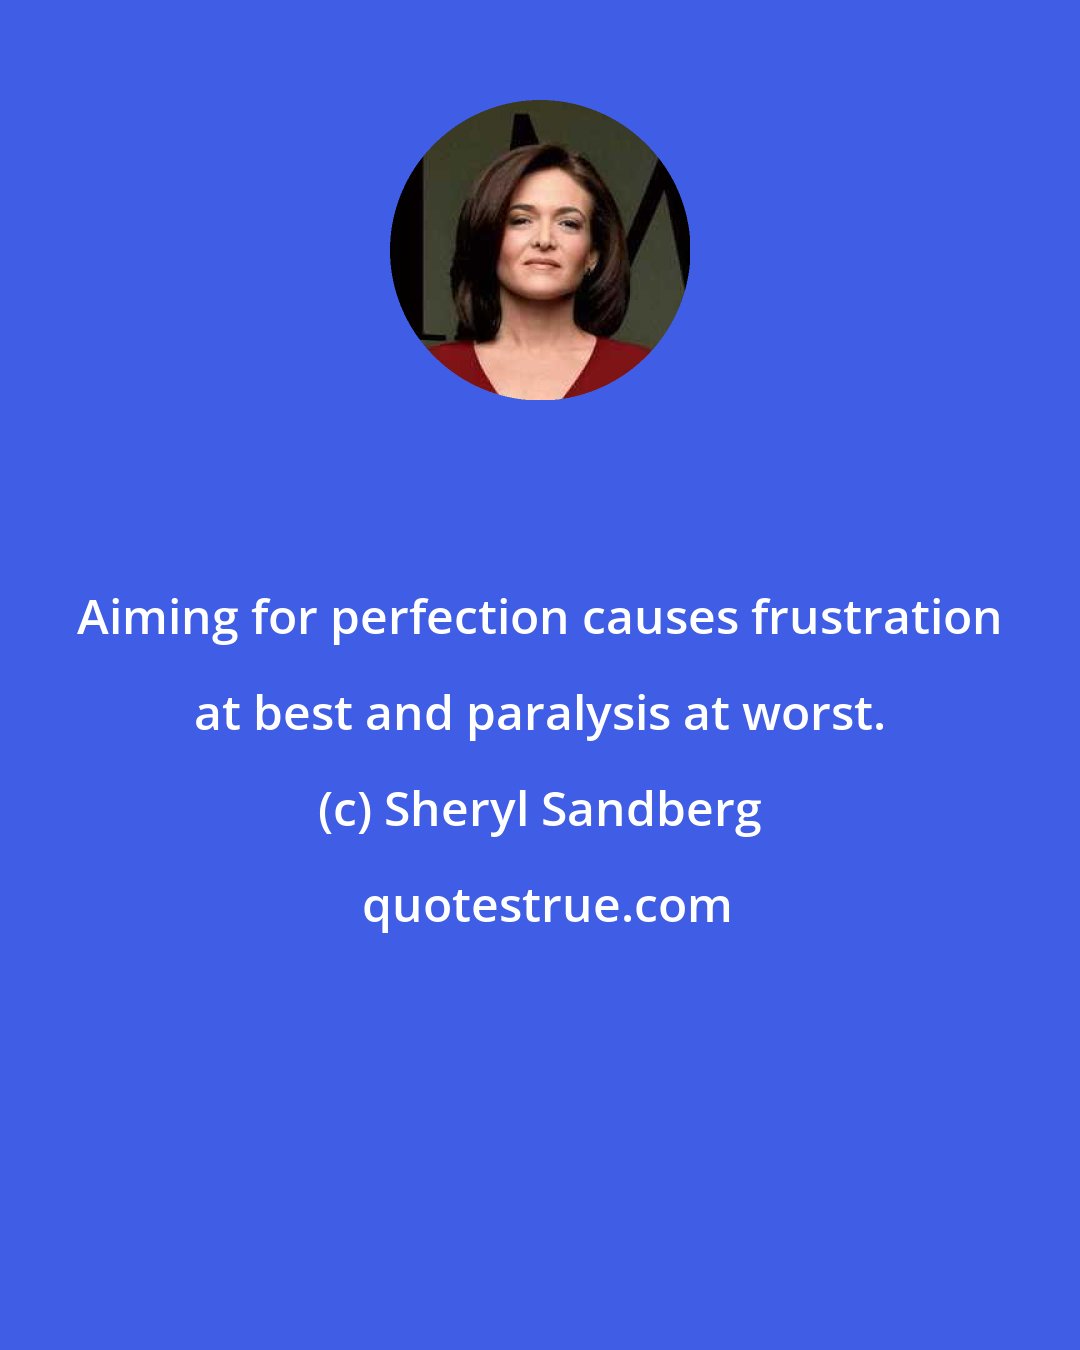 Sheryl Sandberg: Aiming for perfection causes frustration at best and paralysis at worst.